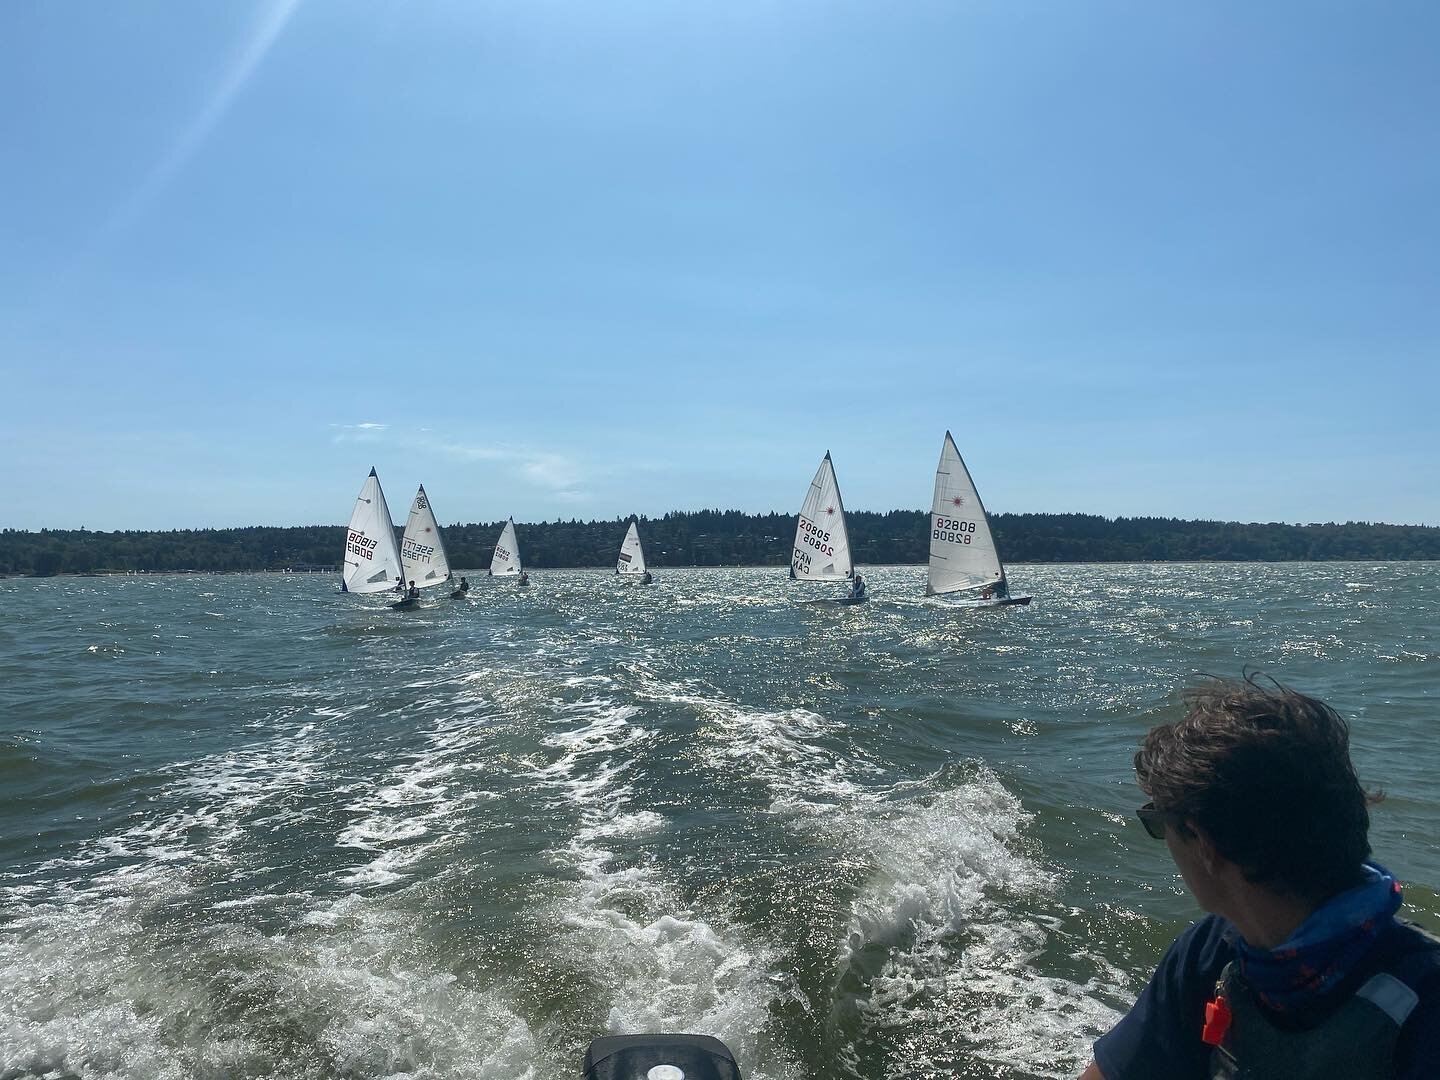 The Race class took a trip across the bay today ☀️⛵️ #summer2020 #hollyburnsailingclub